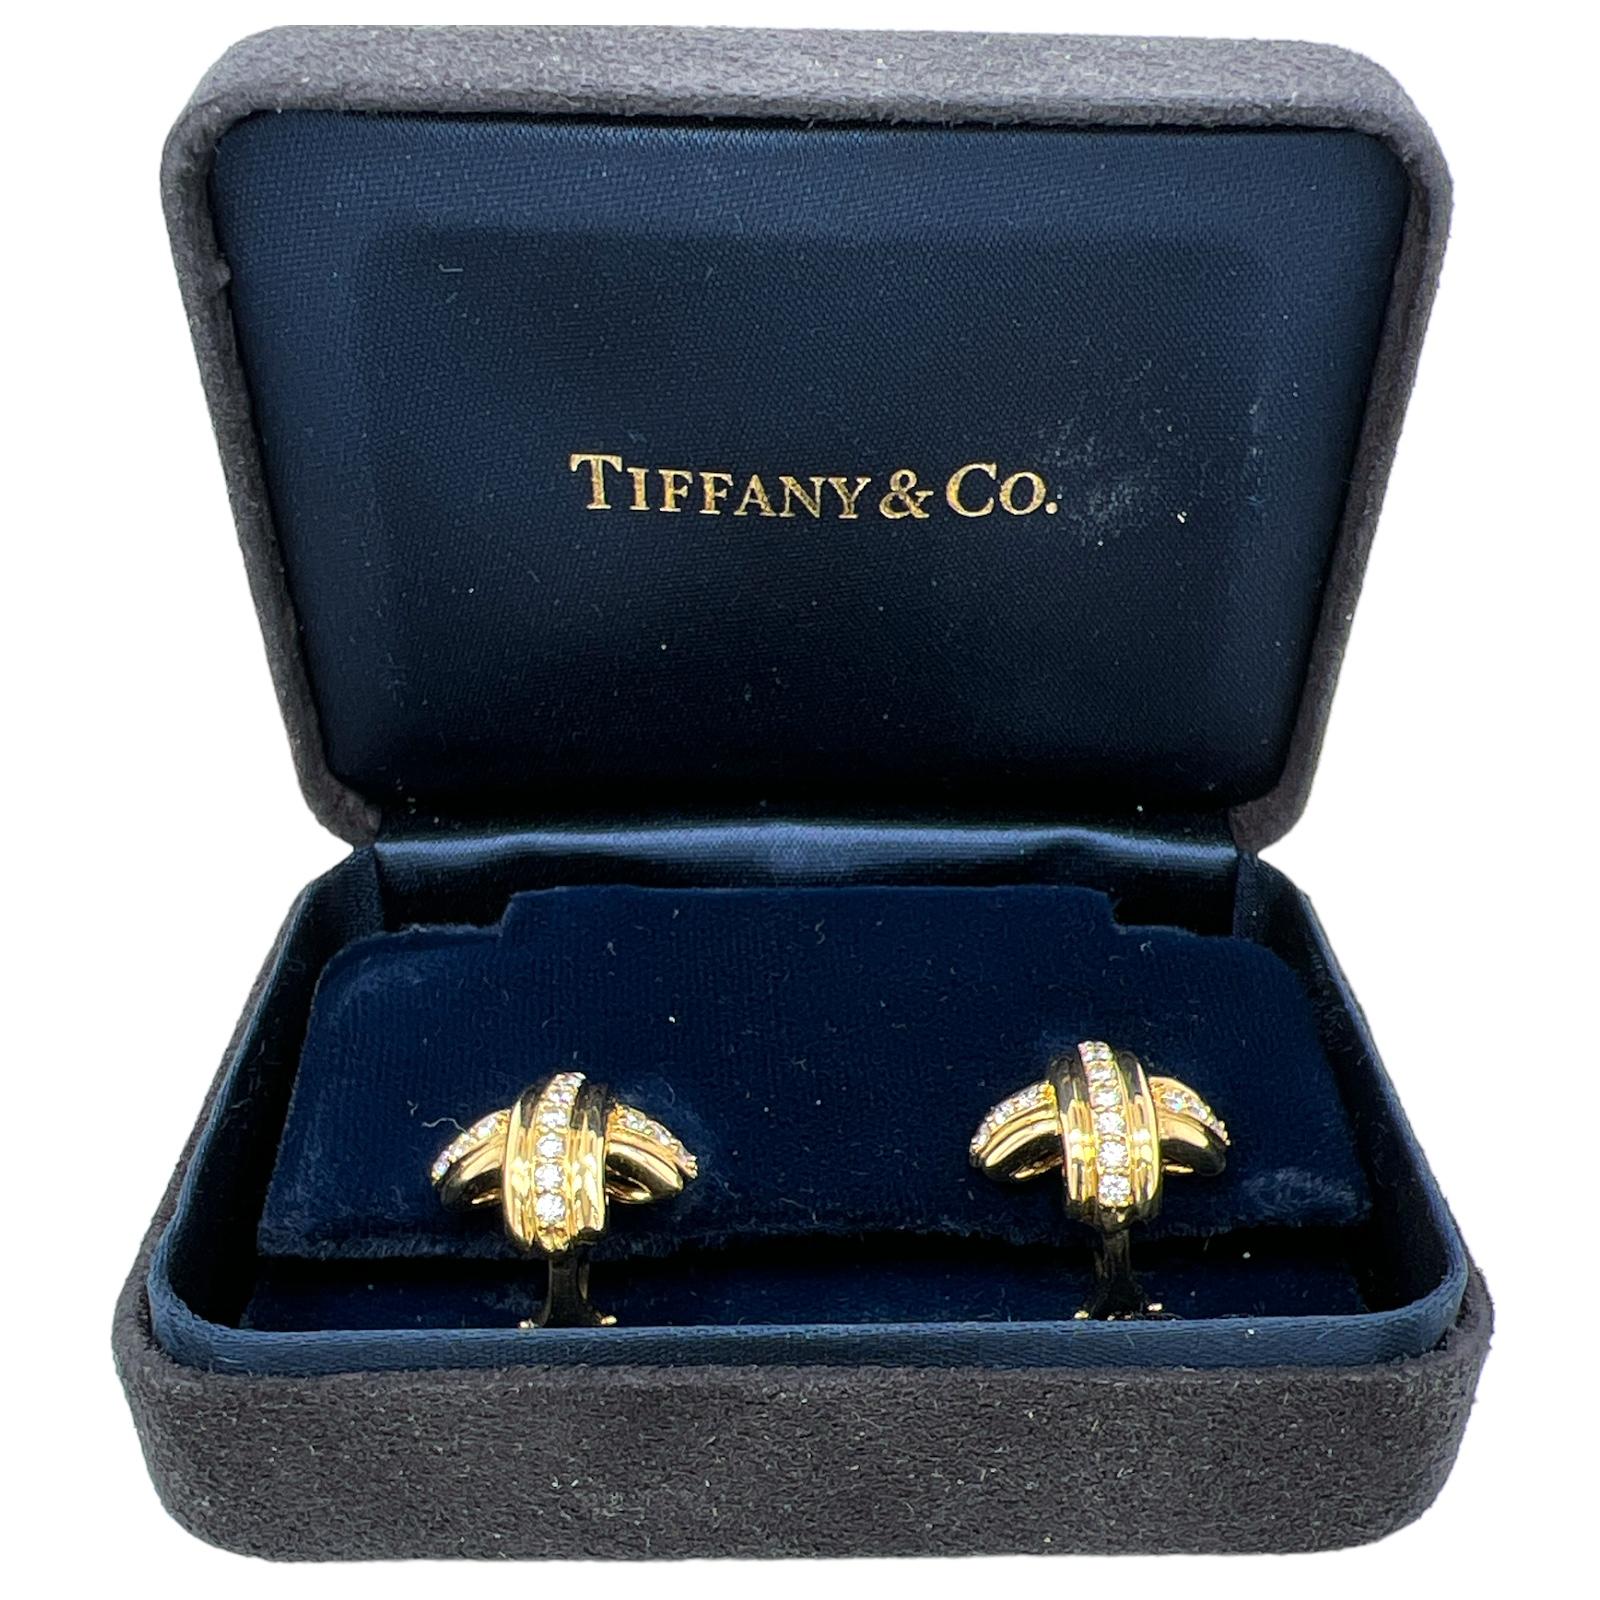 Tiffany & Co's iconic diamond X earrings are fashioned in 18 karat yellow gold. The earrings feature 30 round brilliant cut diamonds weighing approximately .75 carat total weight. The diamonds are graded F-G color and VS clarity. The earrings